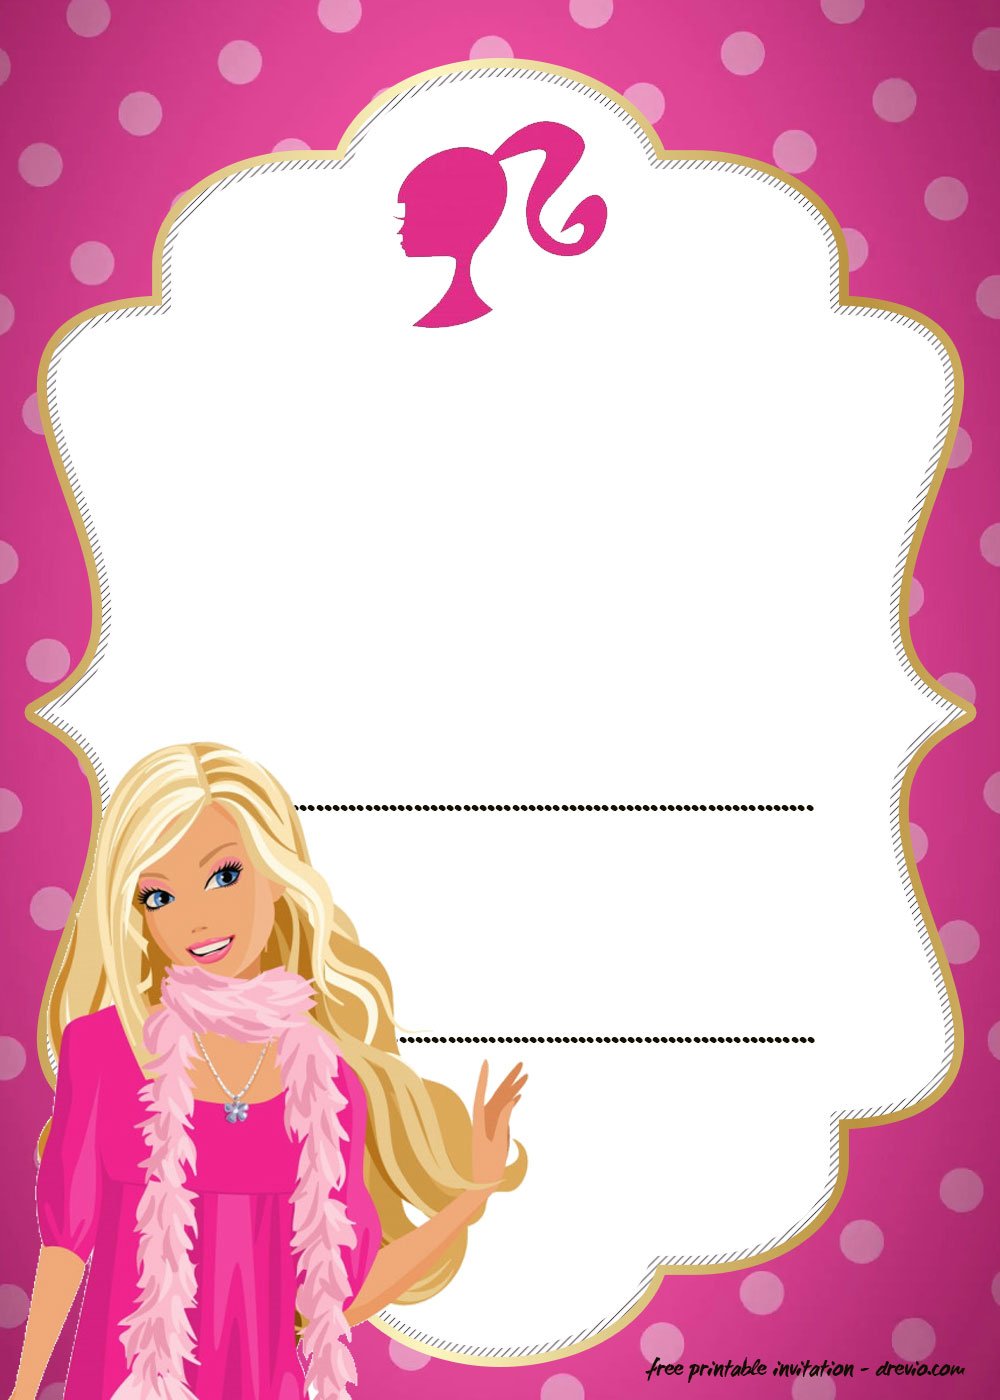 barbie-birthday-invitation-card-template-for-free-download-on-pngtree